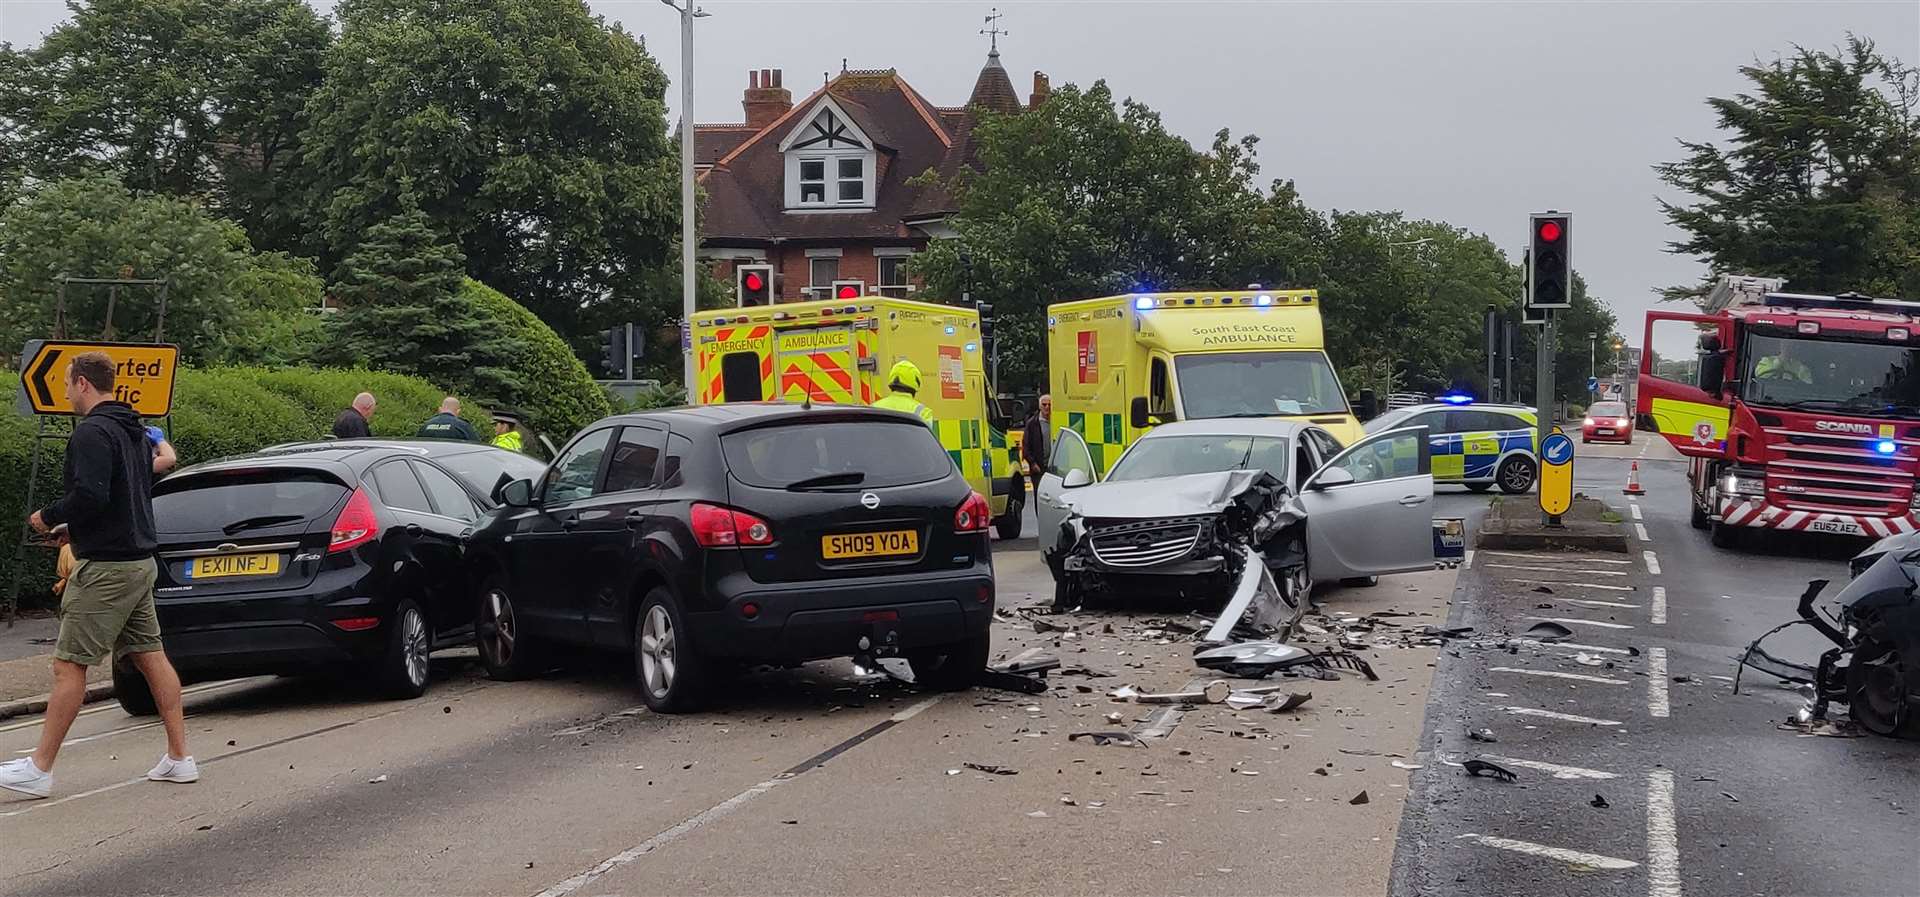 Scene of the crash on Cheriton Road, Folkestone this afternoon. All pictures: Rhys Griffiths